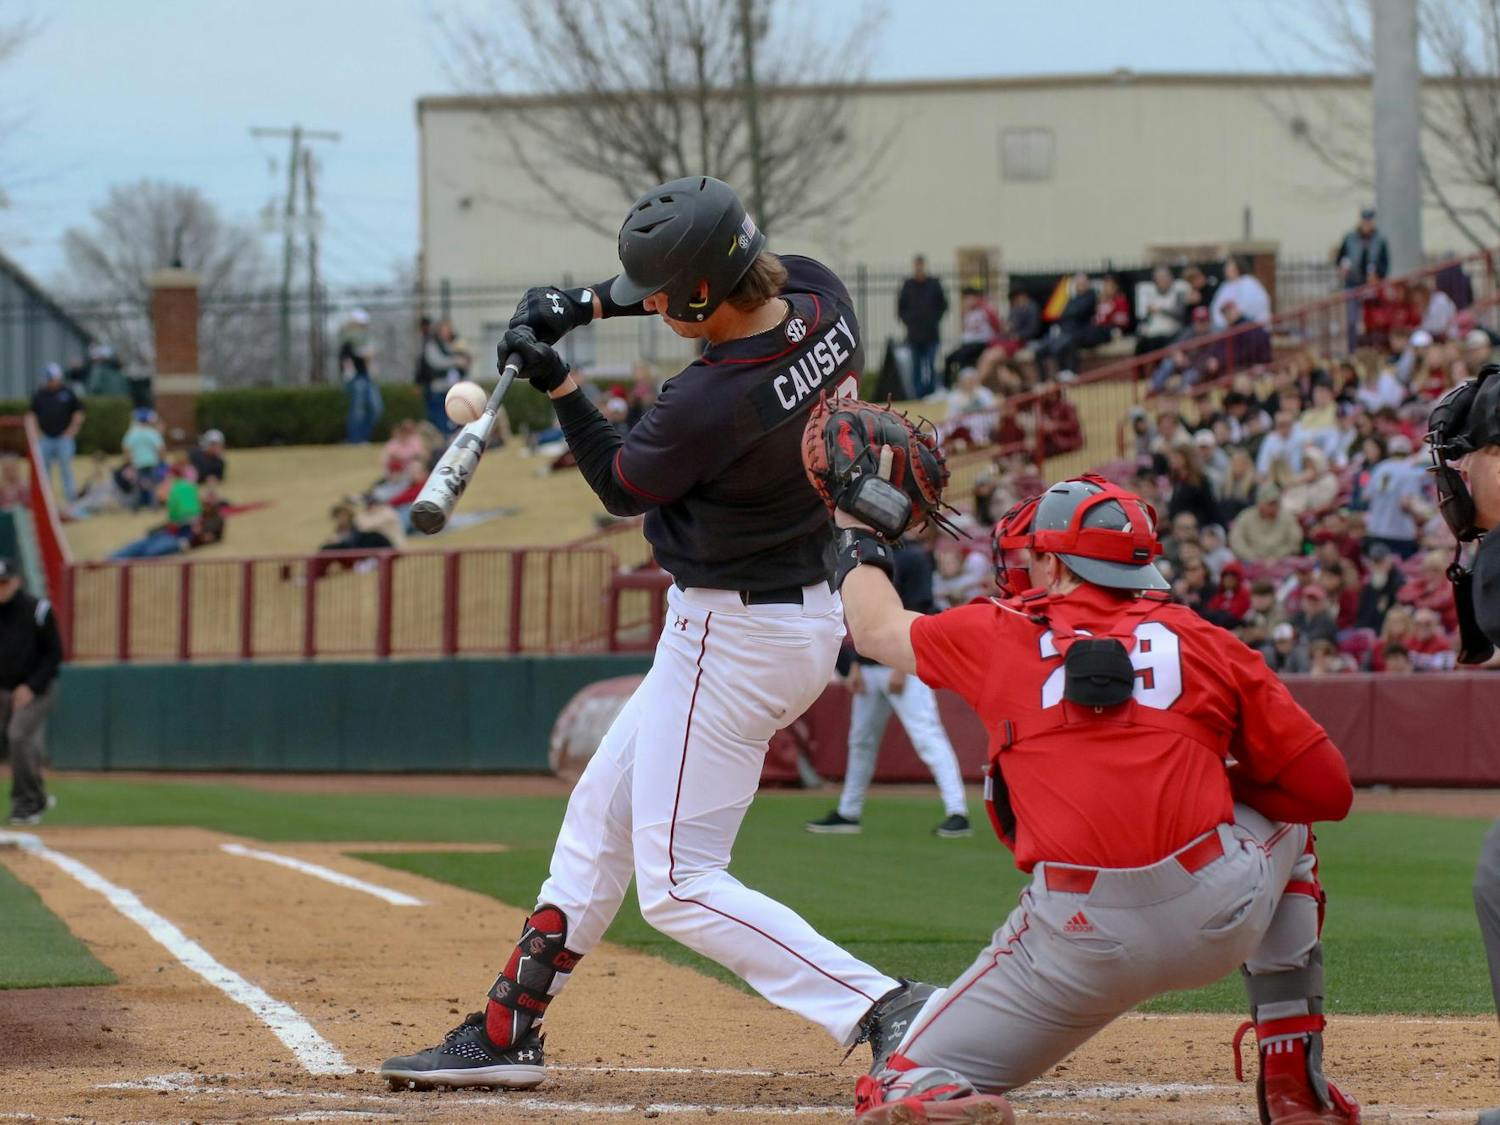 Senior infielder Tyler Causey swings at the ball during the Gamecocks' 14-0 victory over Miami-Ohio on Feb. 18, 2024. Causey had 3 hits during the three-game opening series at Founders Park.